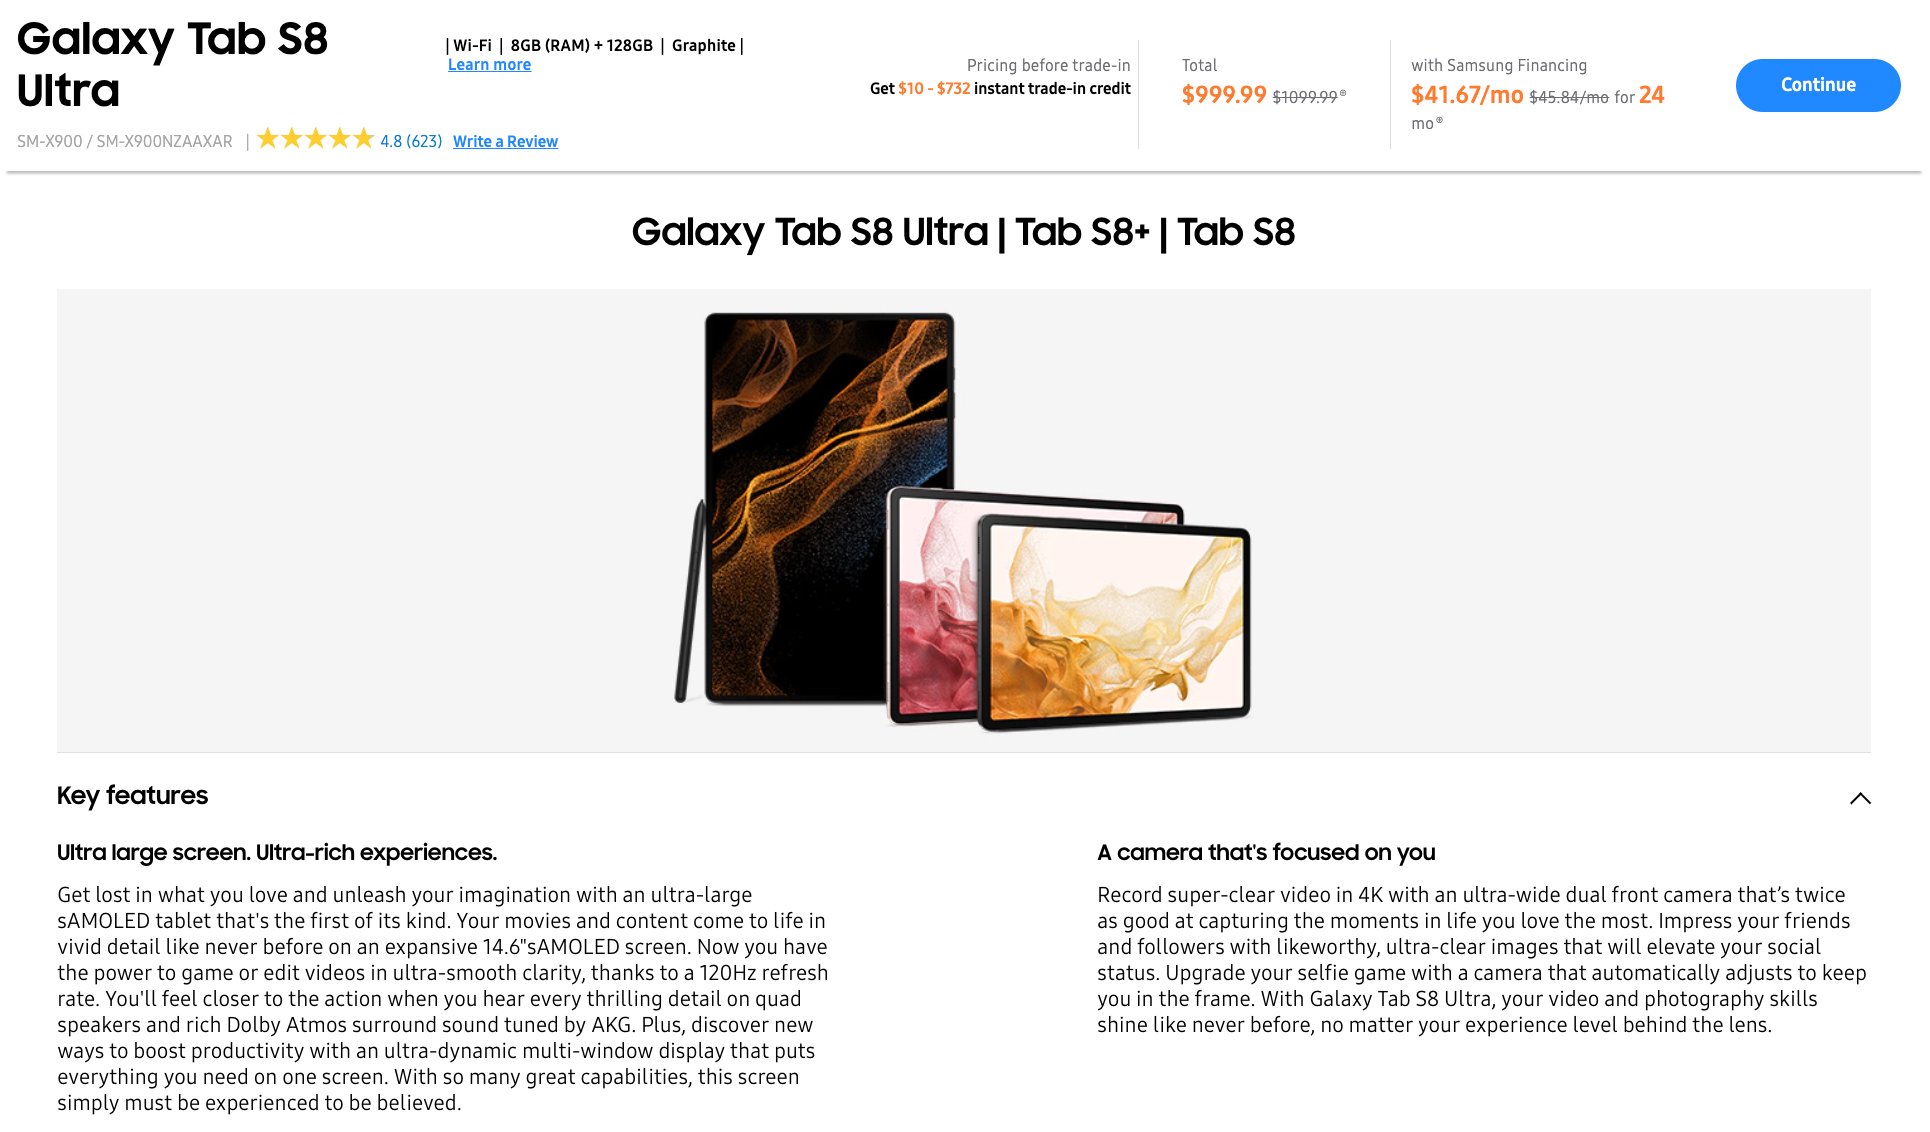 Product description page in the online store of Samsung.com. The website lists the key product features as well as technical specifications